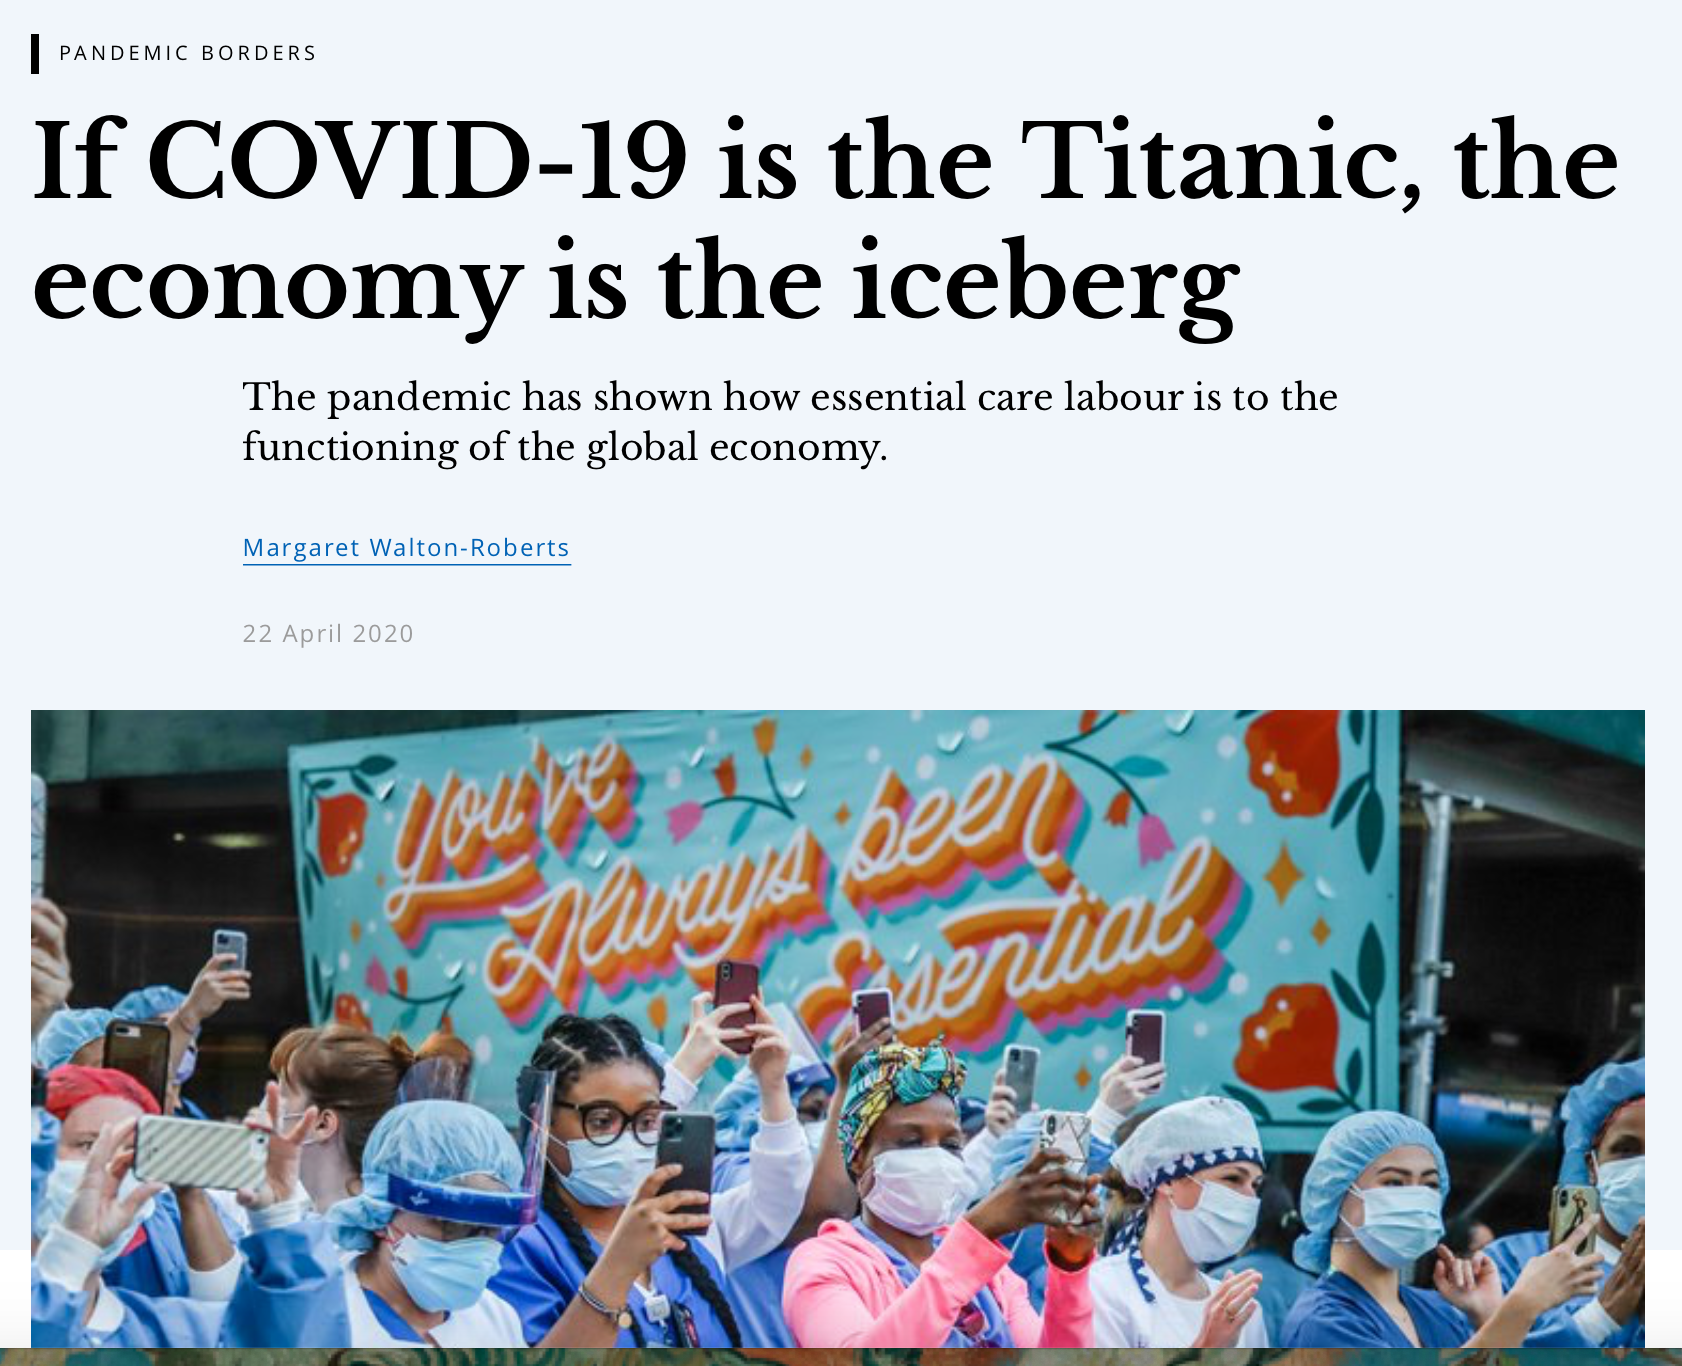 If COVID-19 is the Titanic, the economy is the iceberg